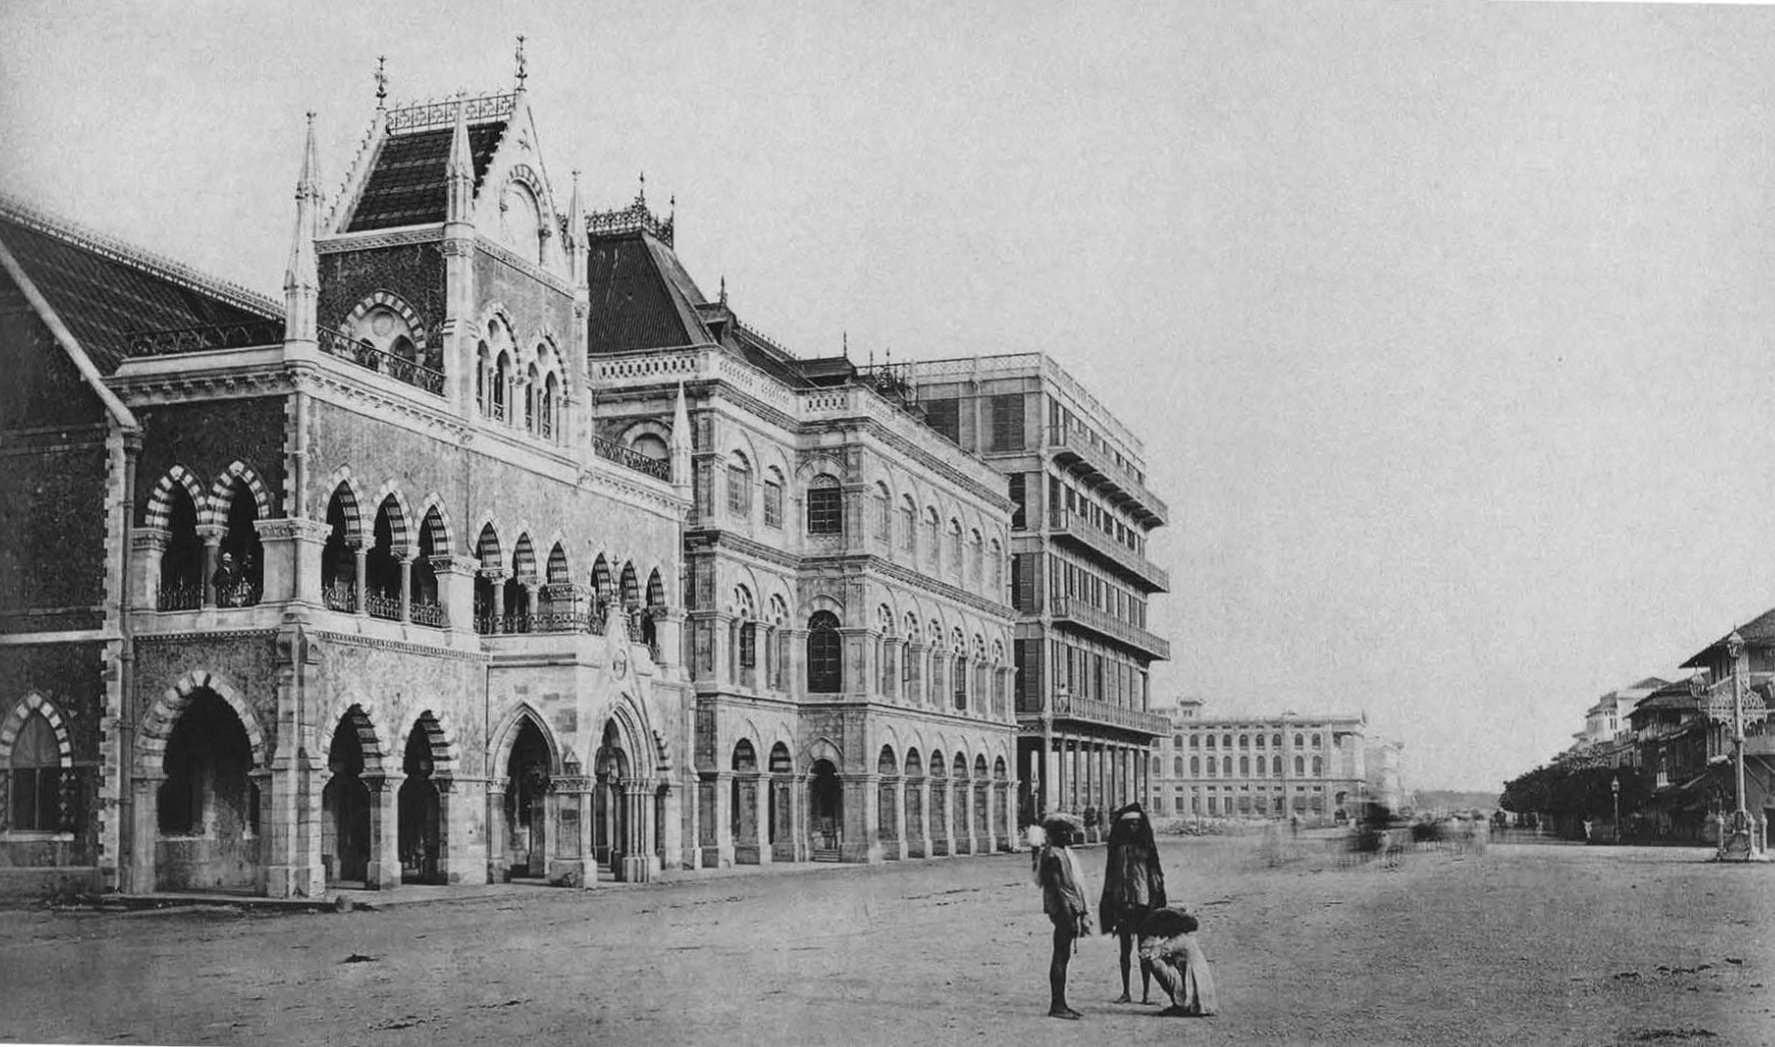 Old photo of Kala Ghoda area showing David Sassoon Library, Army & Navy Buildings, and Watson's Hotel (also called Esplanade Mansion).Dates back to 1869-75